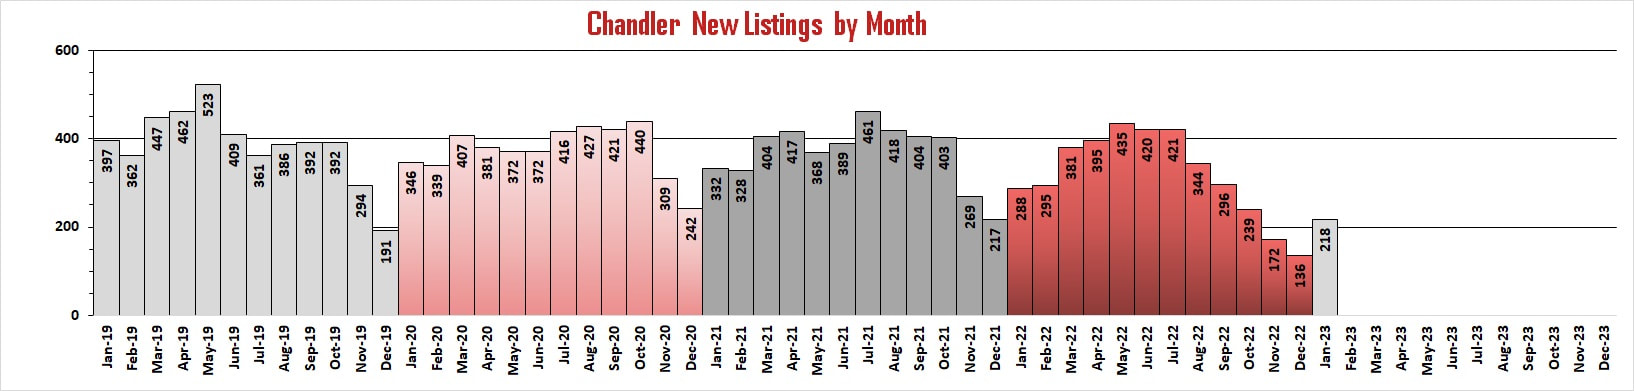 Chandler Market Reports - New Listings by Month | Troy Erickson Realtor